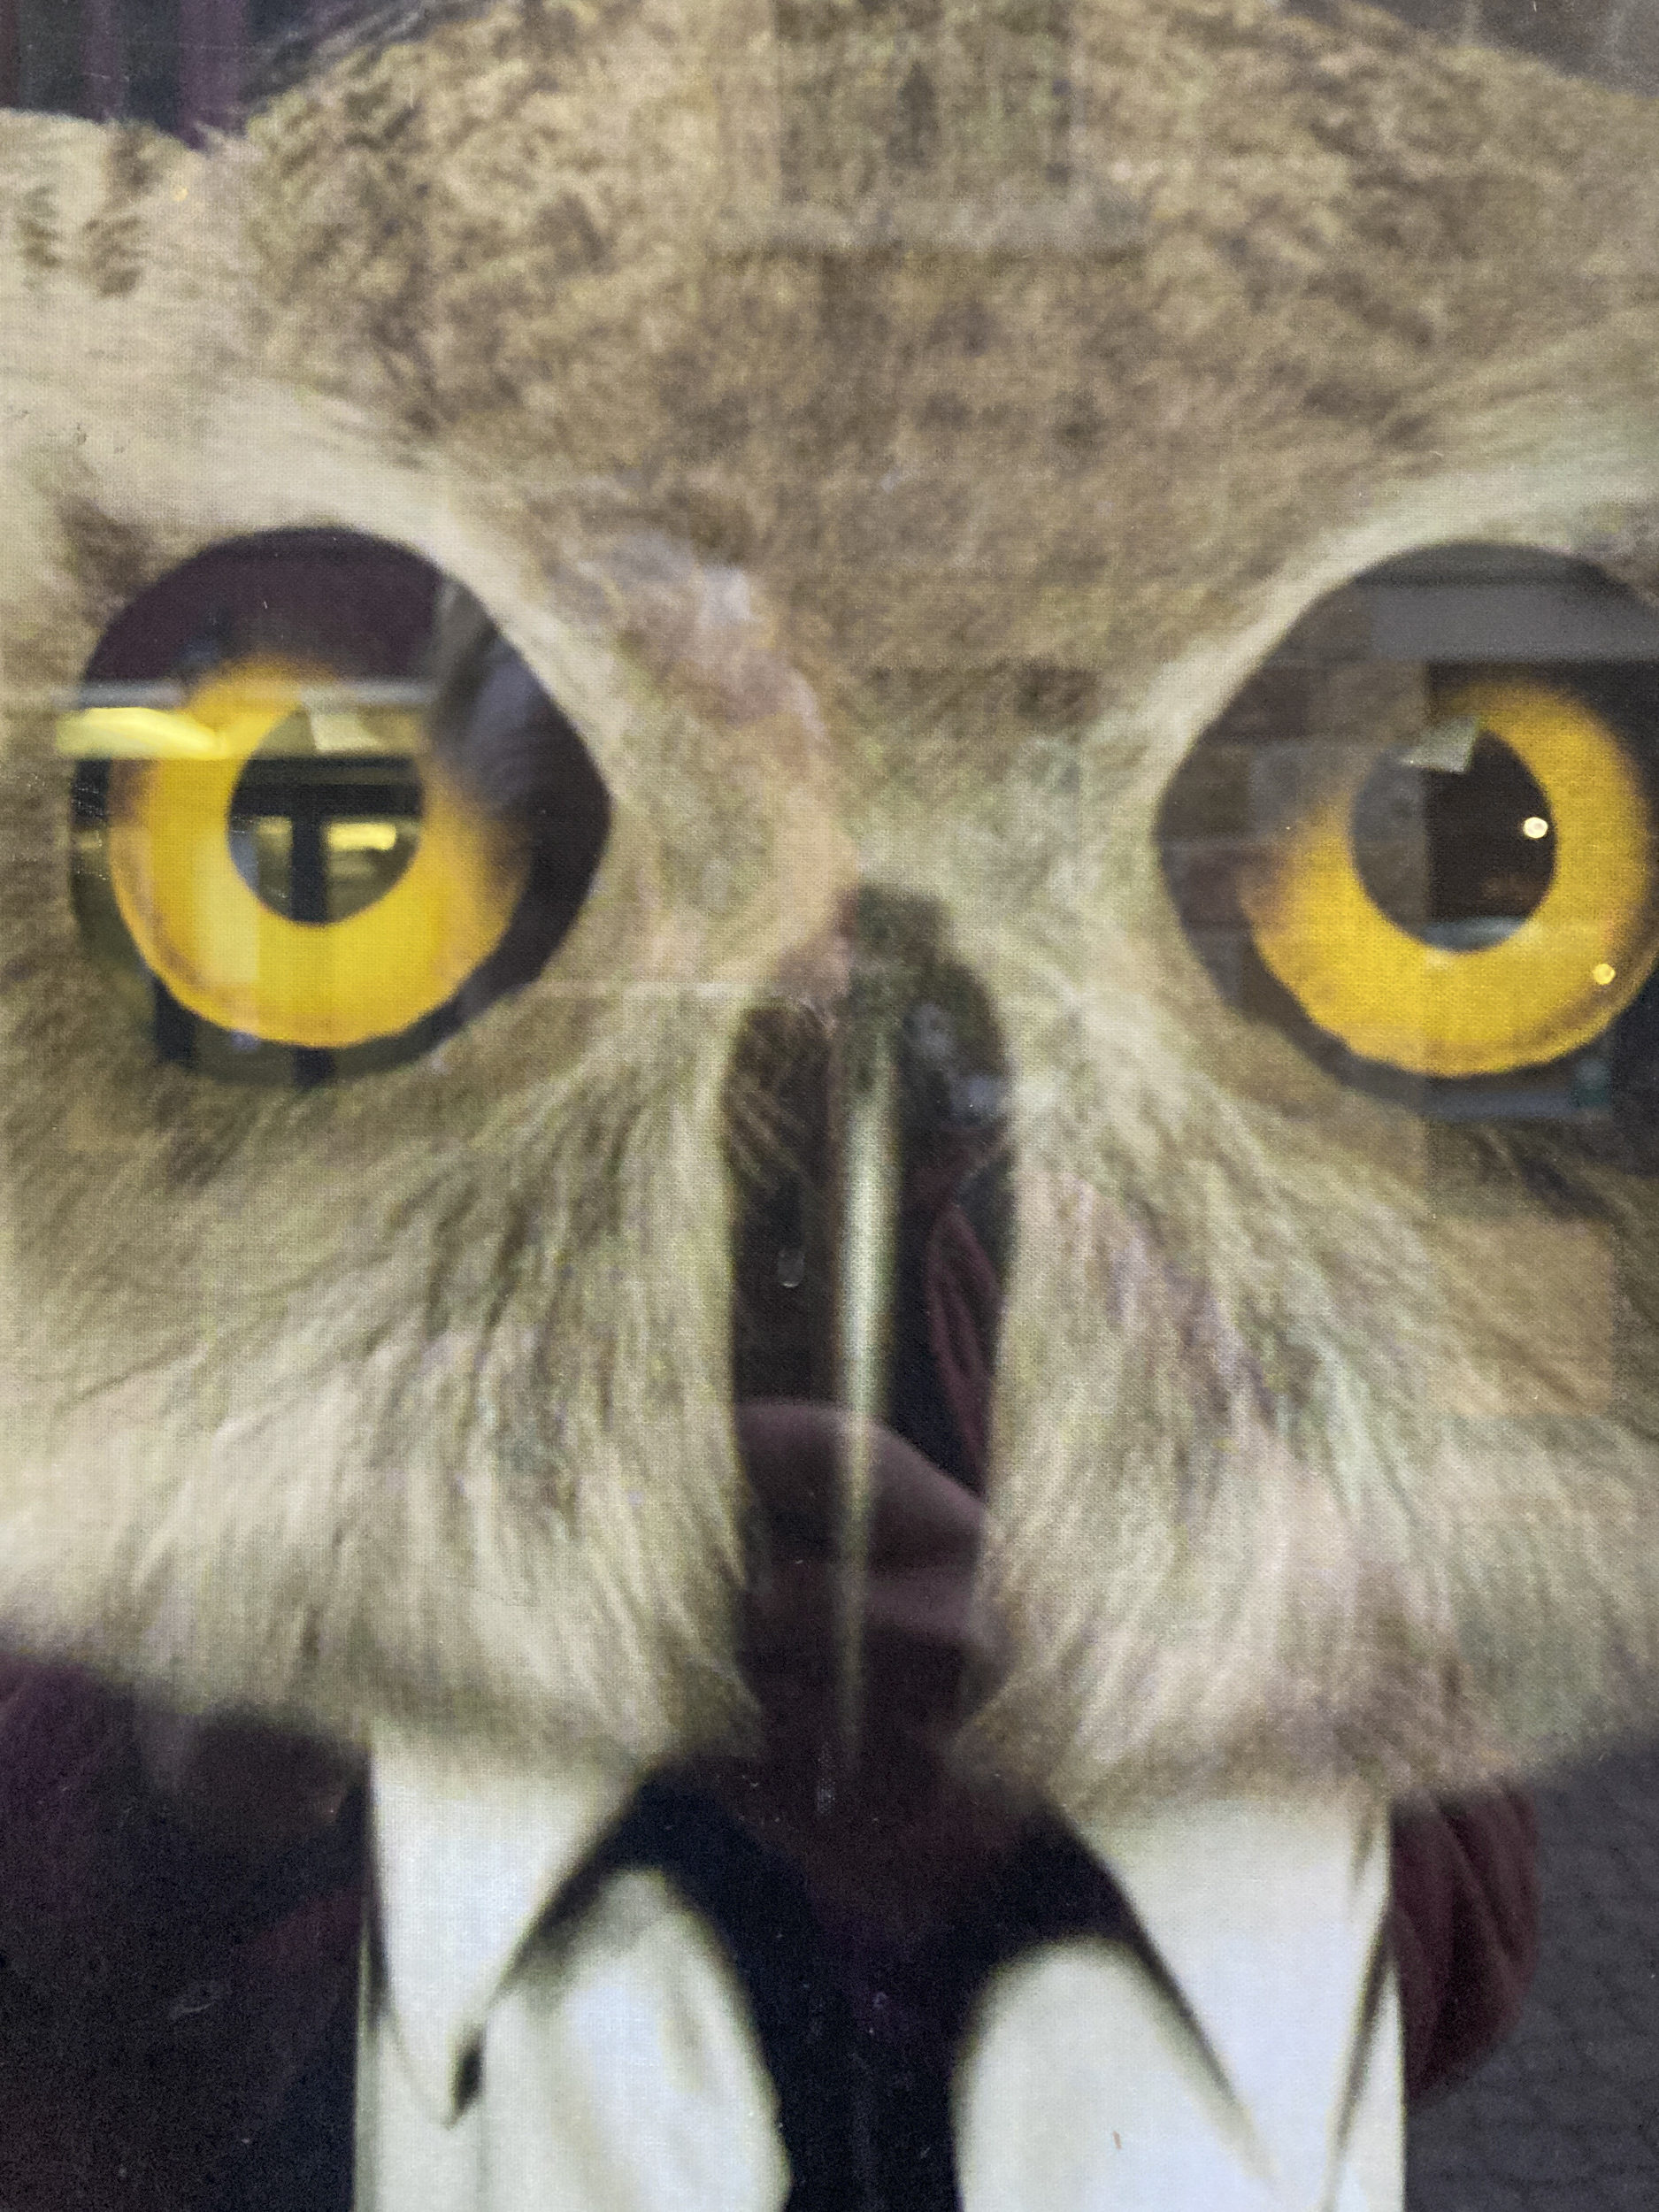 Close up of a picture of an owl wearing a suit behind glass, It has yellow eyes. There are reflections in the glass